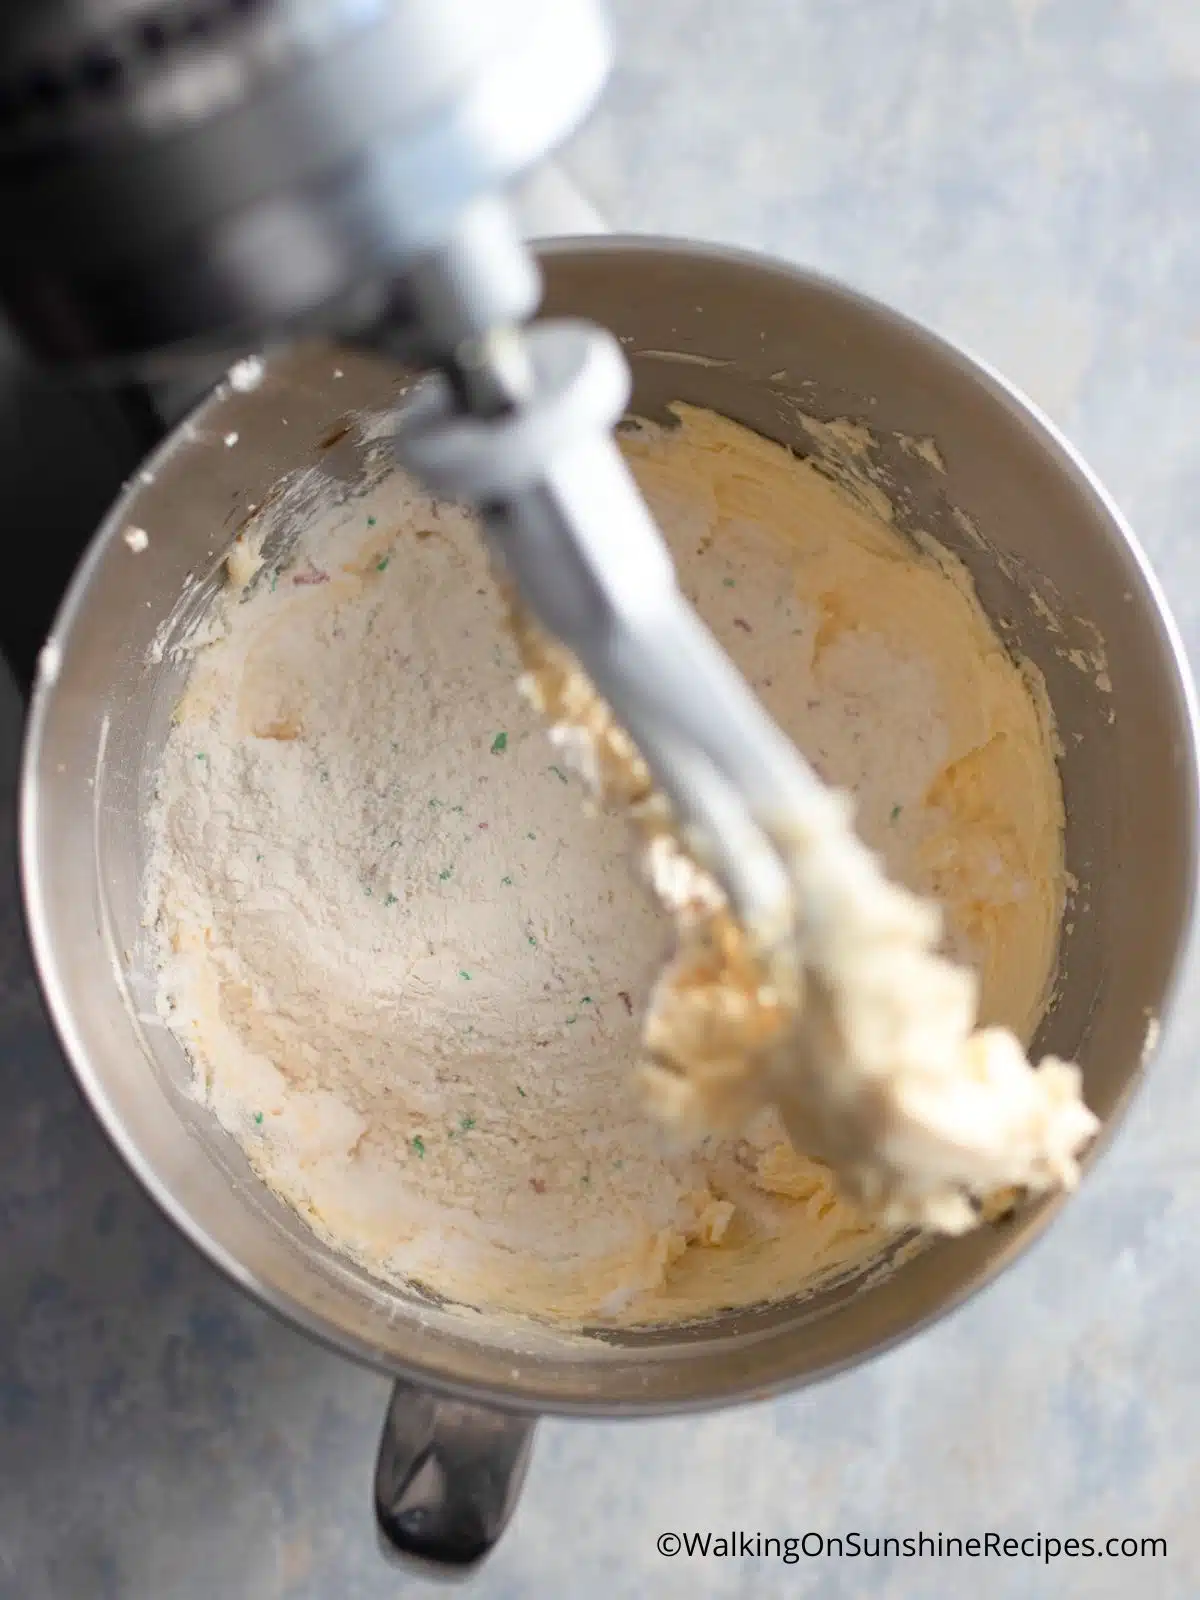 Combine dry ingredients with butter and sugar.